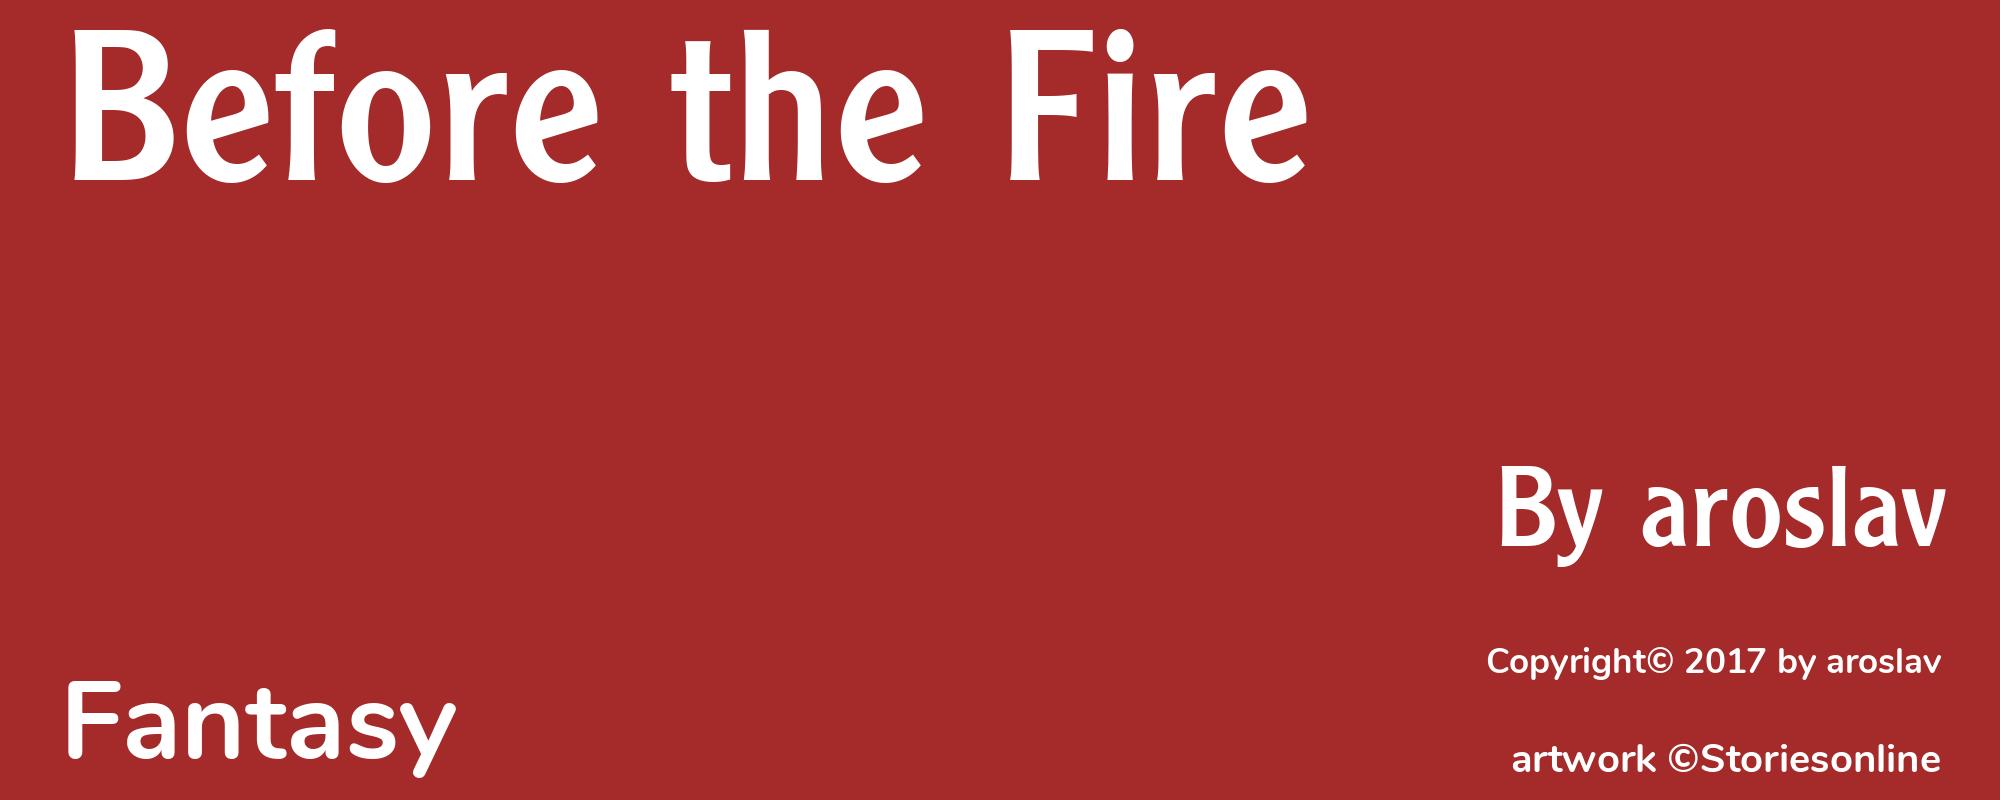 Before the Fire - Cover